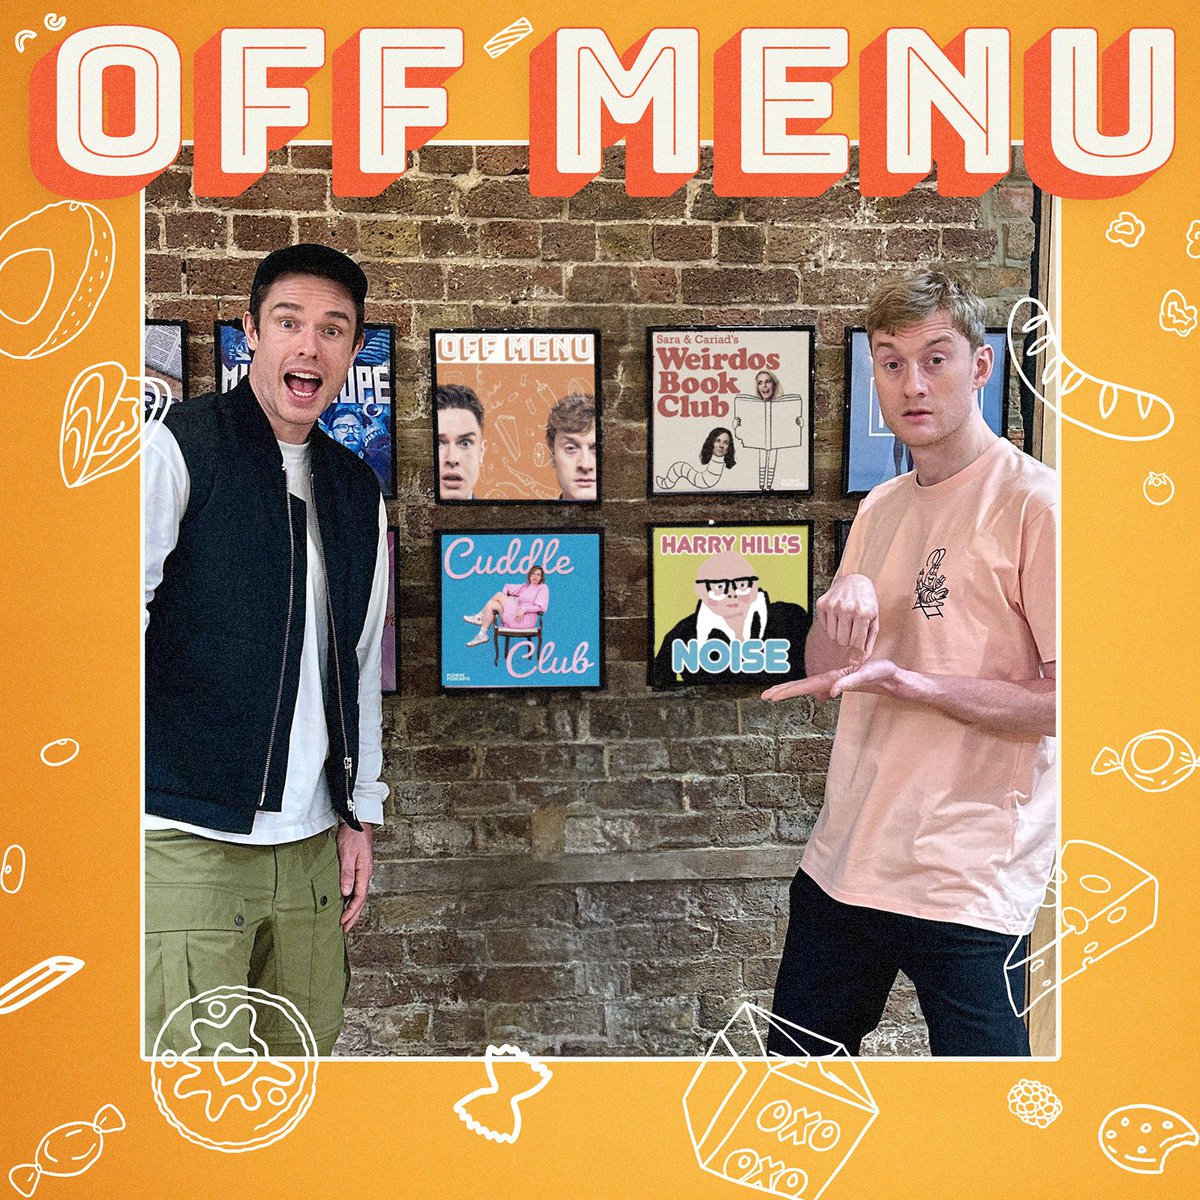 Ed's TM slain foe is the sight that I fear most

#KatyWix #EdGamble #JamesAcaster #OffMenuPodcast #NoContext #OffMenu